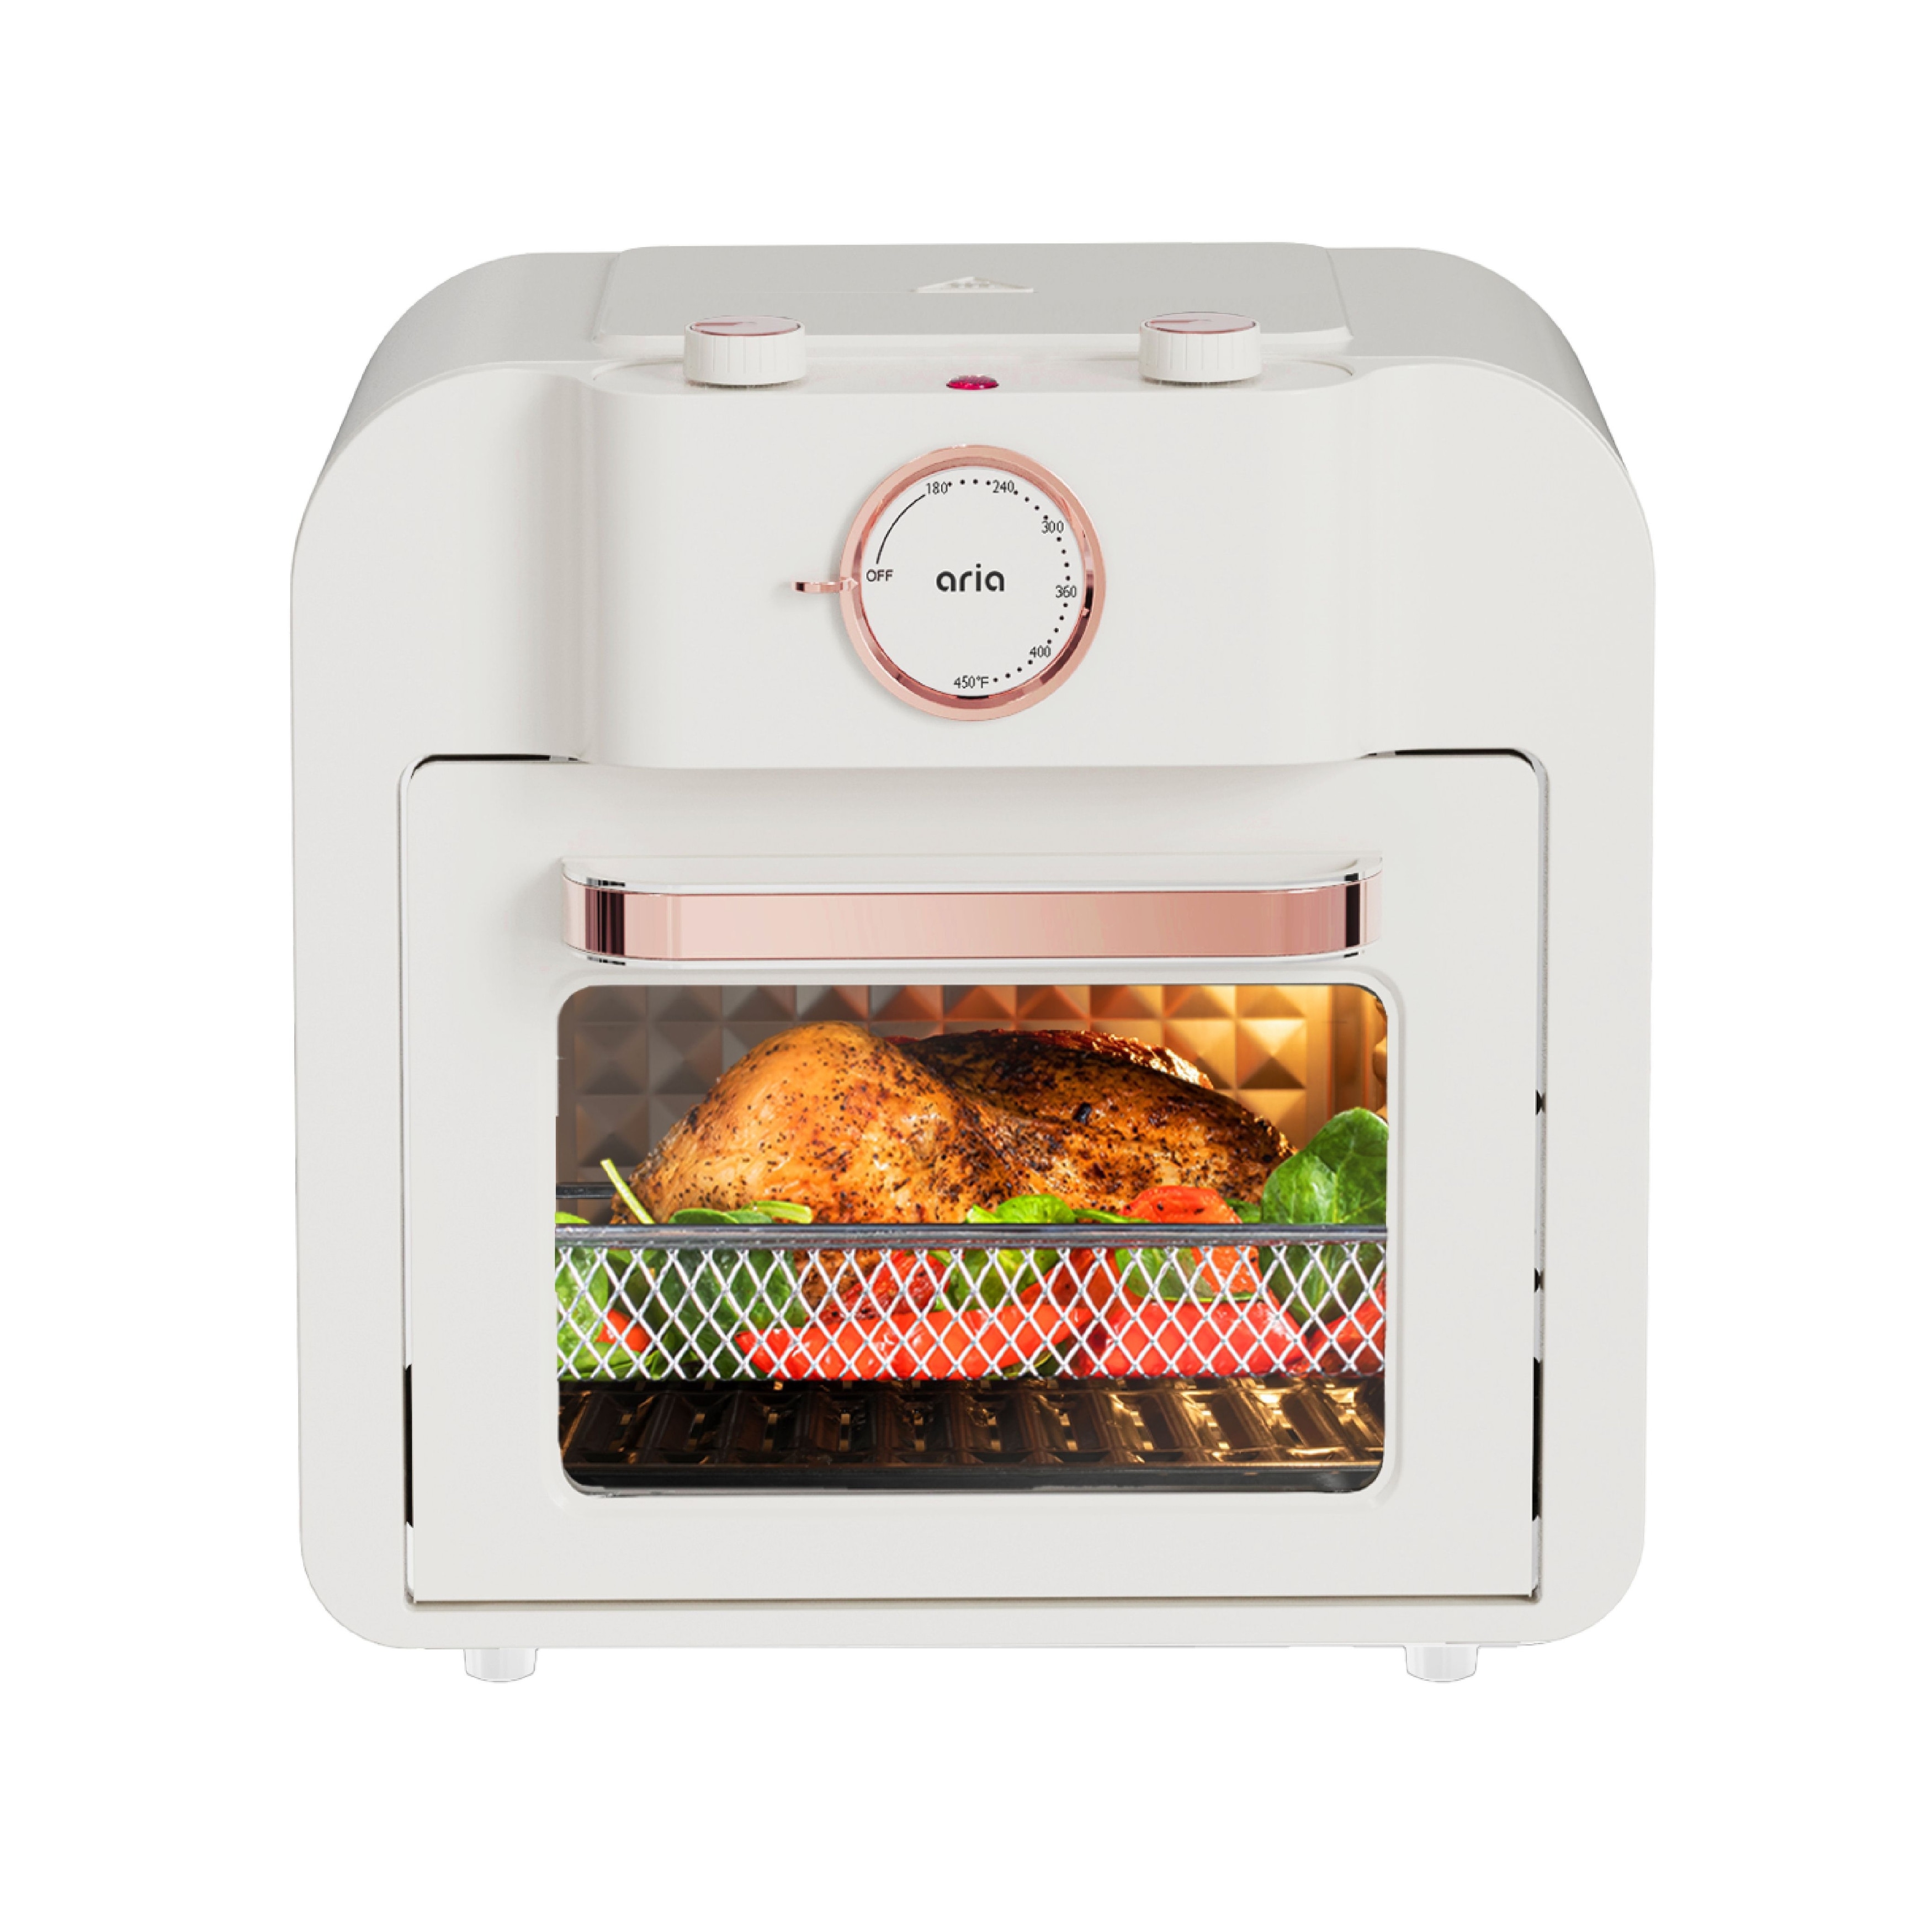 https://ak1.ostkcdn.com/images/products/is/images/direct/c90c9c37a05c0bc092467f060f28d2a8c25c2d07/Aria-16QT-Retro-Air-Fryer-Toaster-Oven.jpg